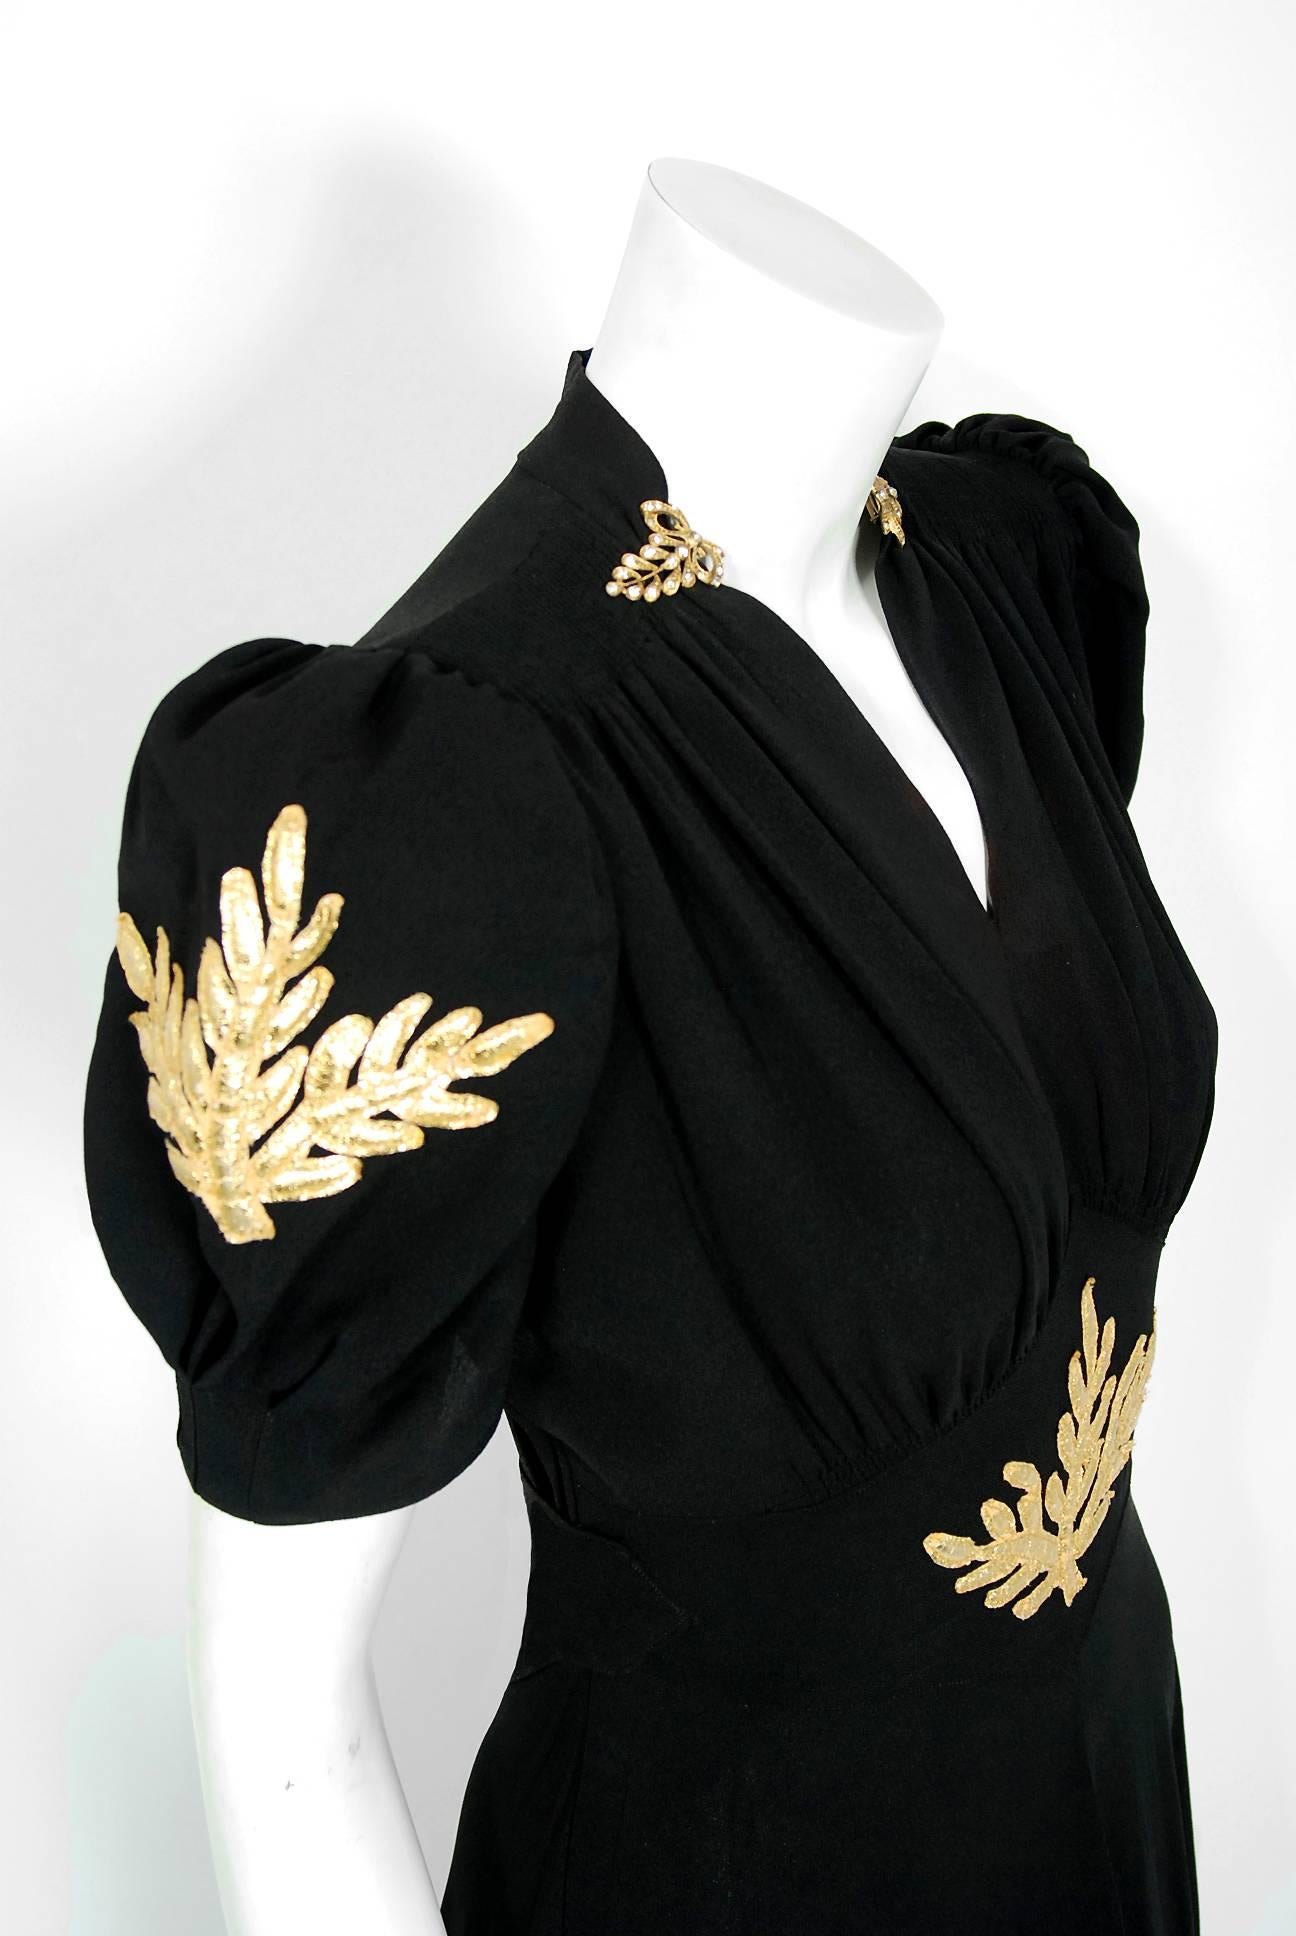 A gorgeous jet-black rayon crepe gown from Old Hollywood era of glamour. The bodice is a seductive rhinestone-paste trimmed low plunge ruched bias-cut with dramatic puff sleeves. I love the metallic-gold lame leaf motif applique work which really